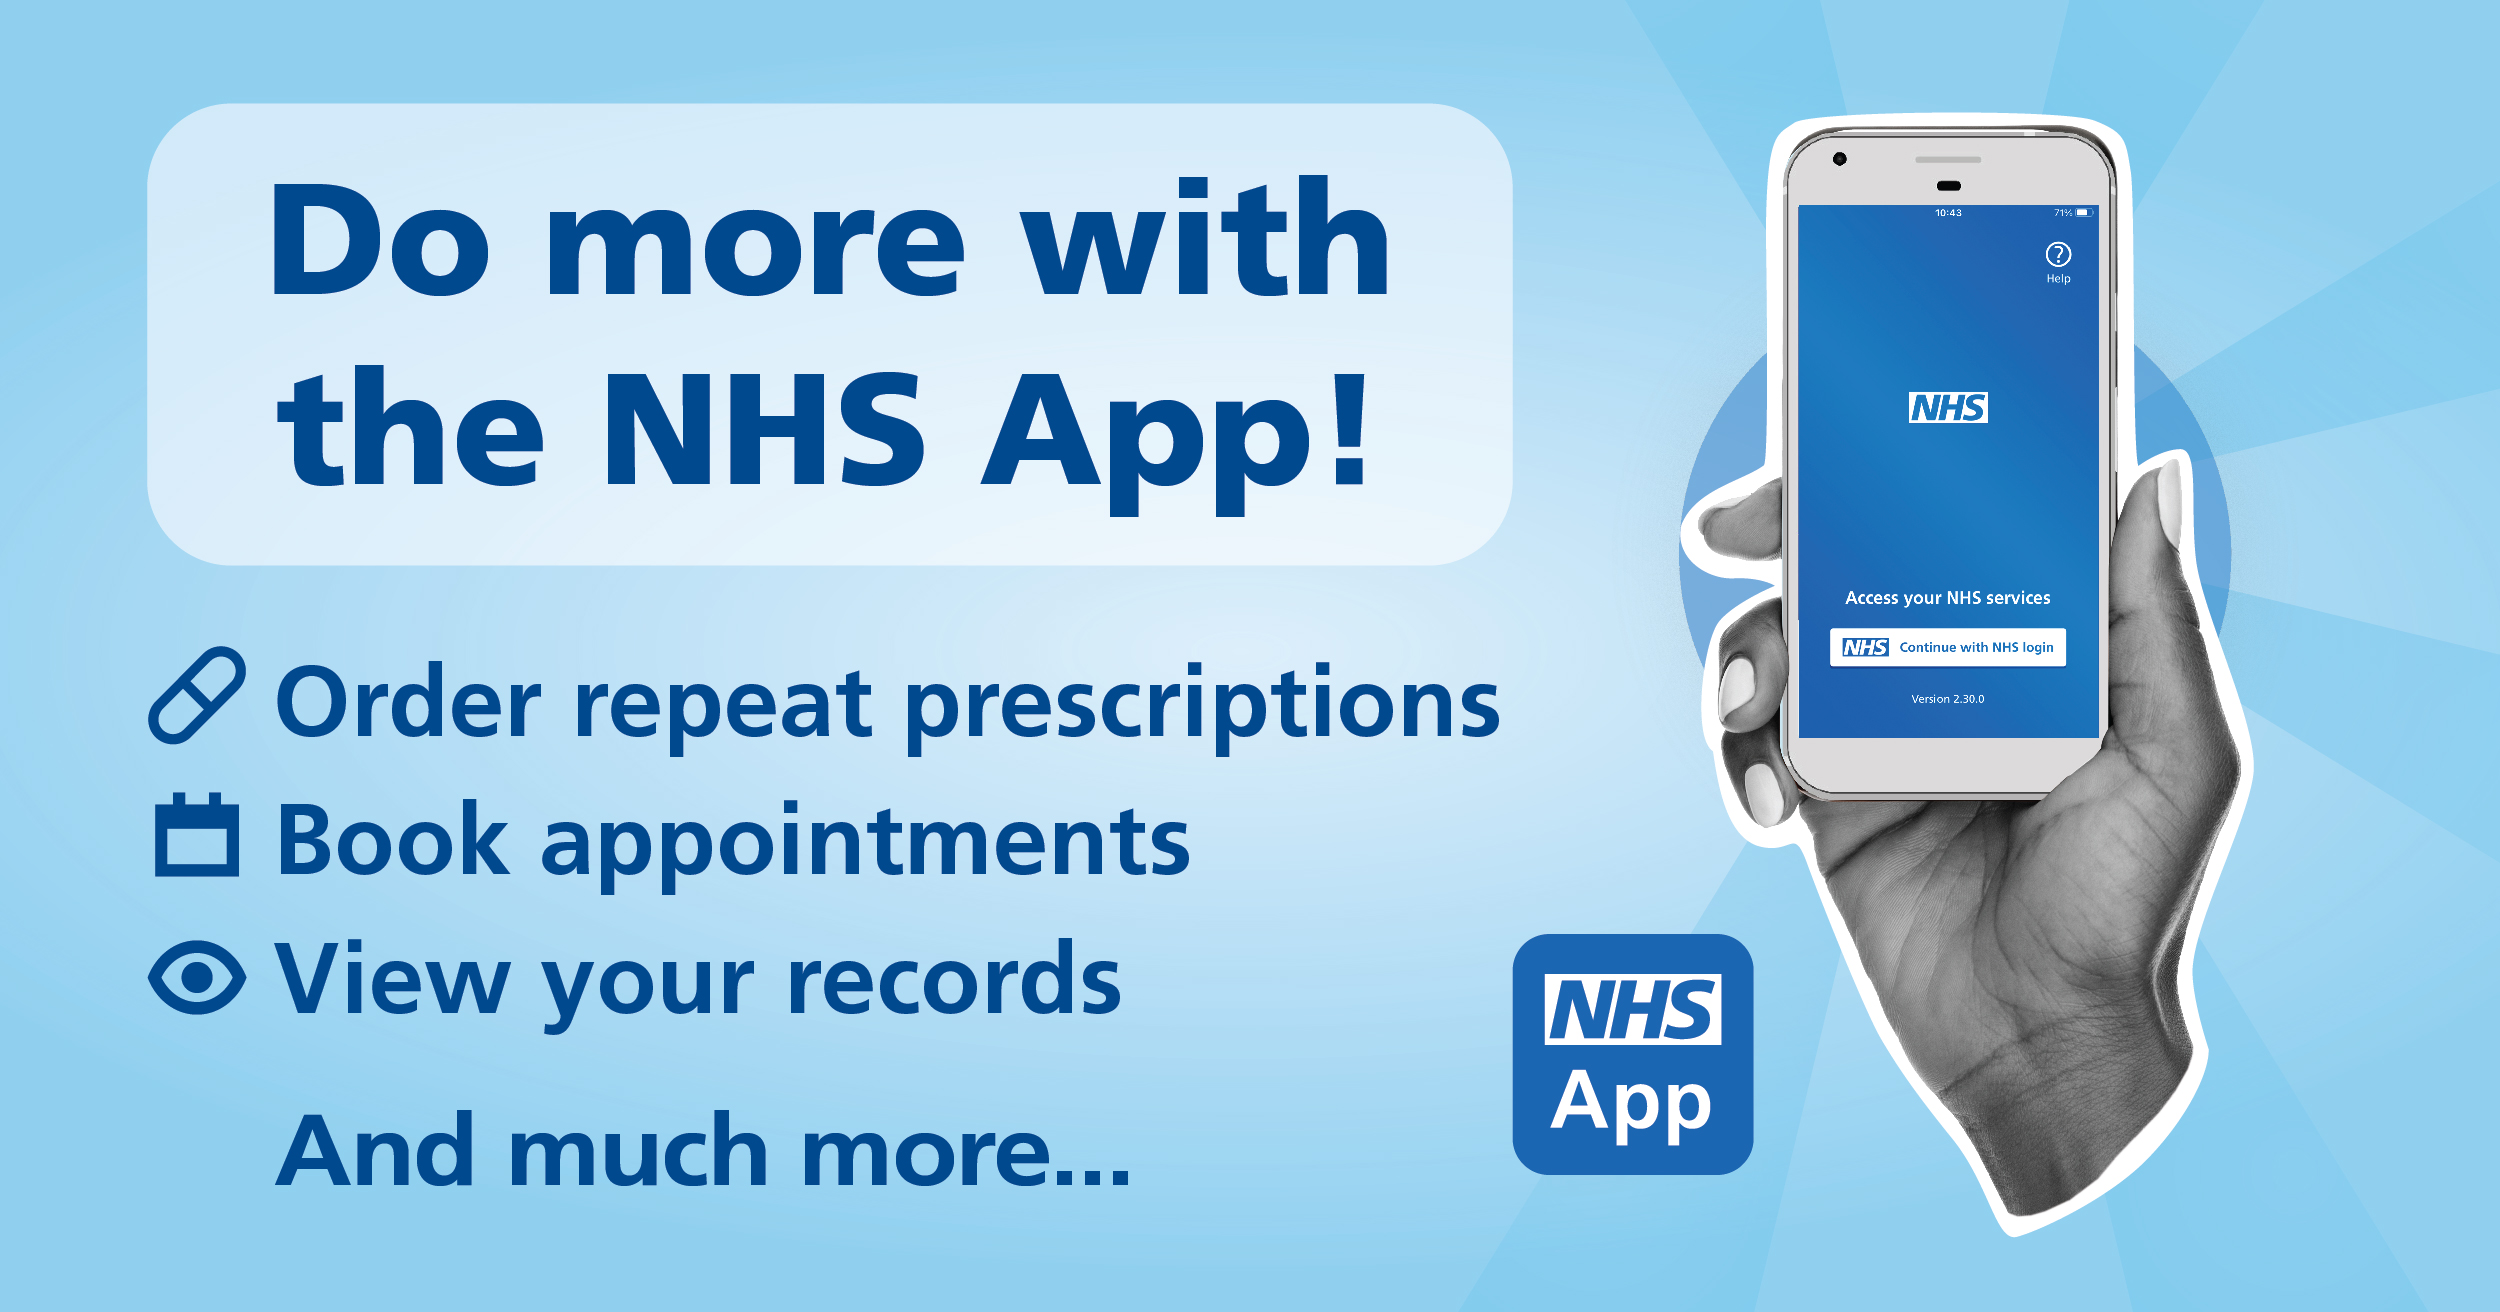 Do more with the NHS App! Order repeat prescriptions, book appointments, view your records and much more.